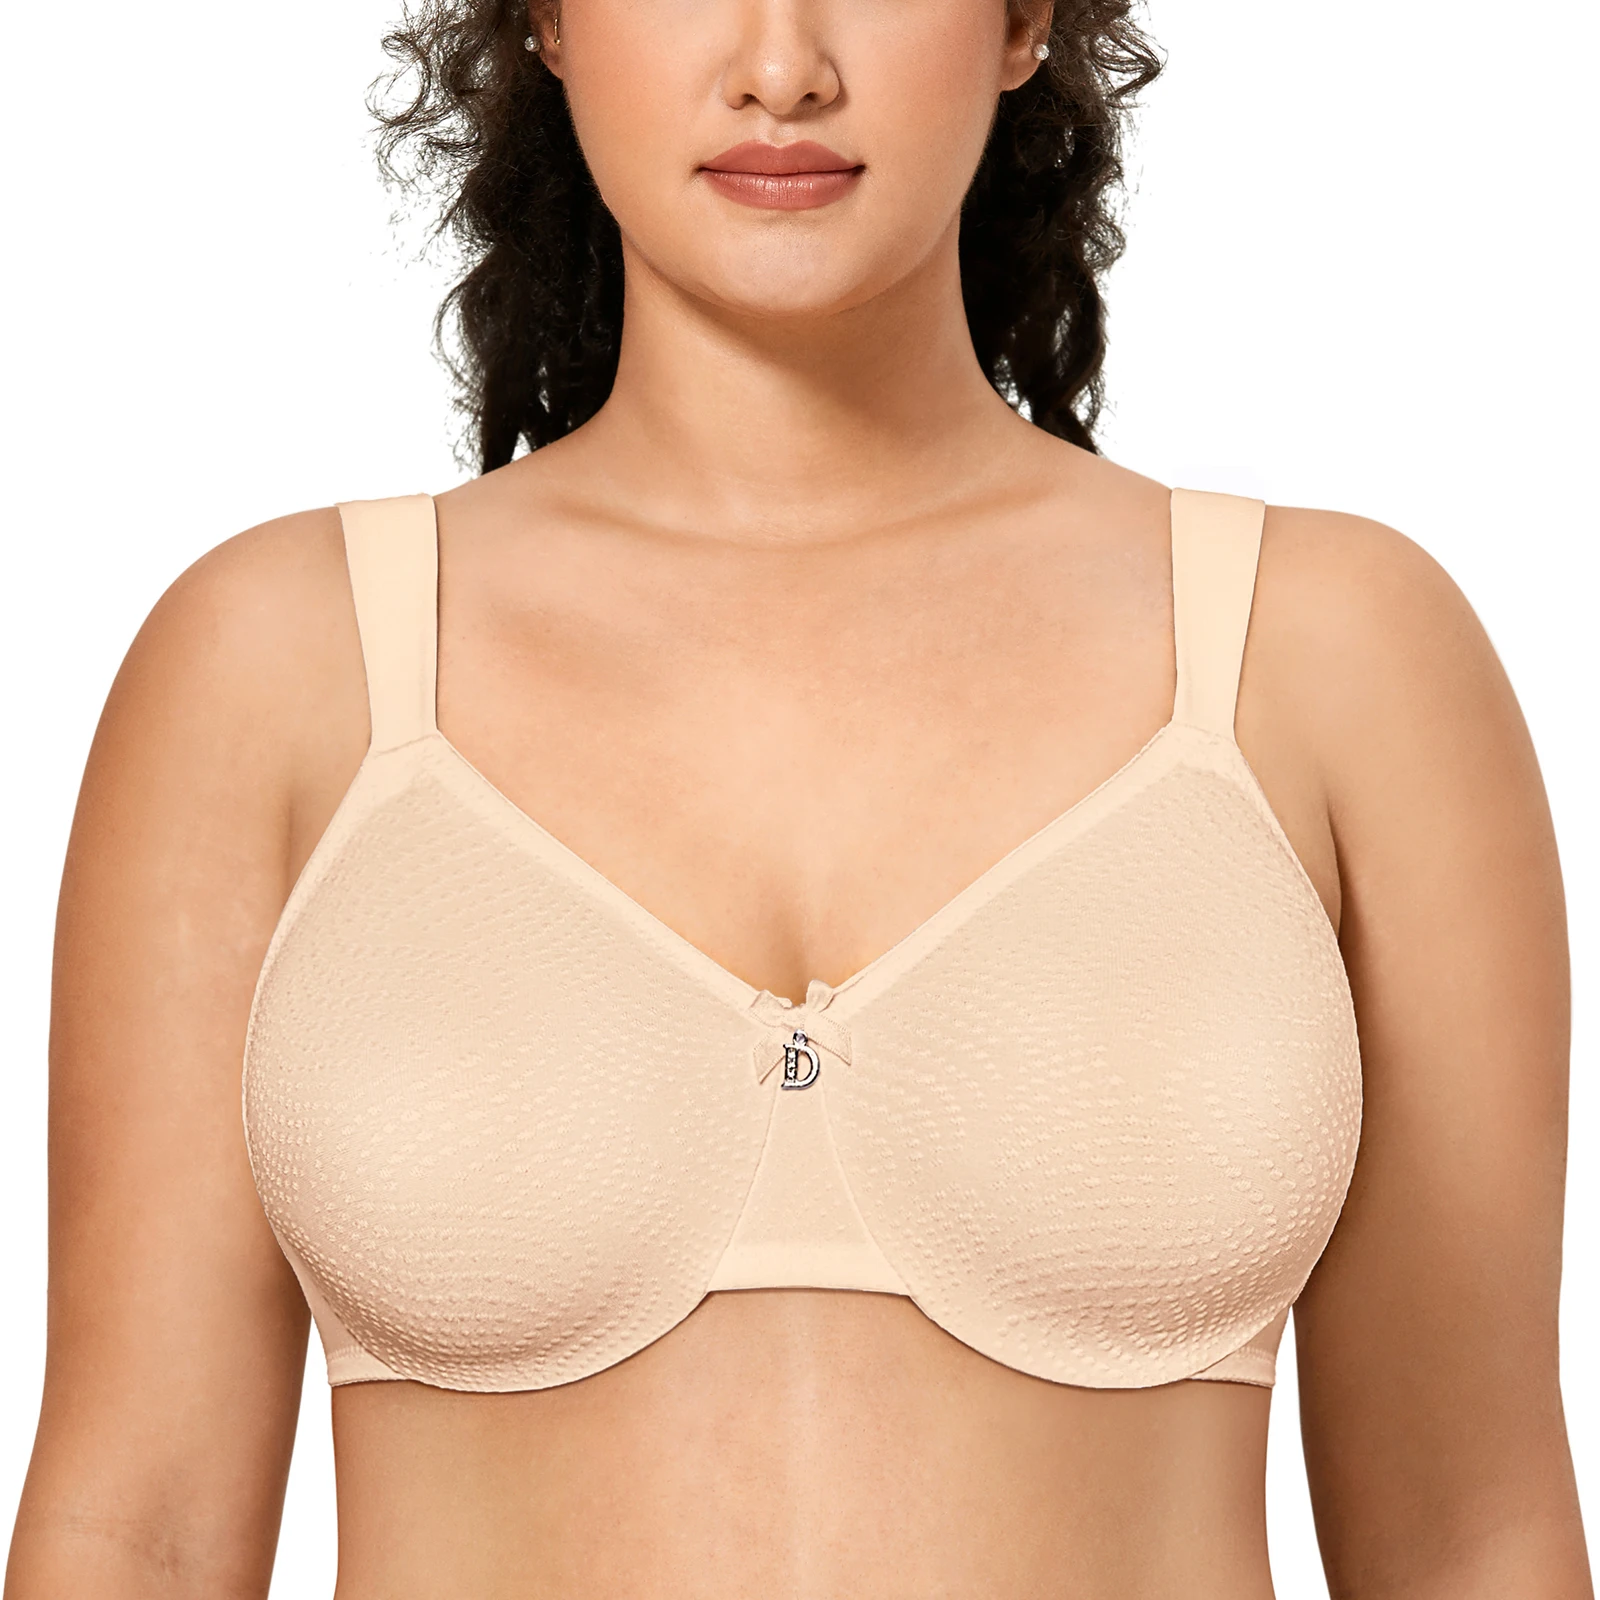 

Women's Minimizer Bra Plus Size Full coverage Unlined Support Underwire Cushioned Wide Straps Semi-sheer Mesh Cup Bras